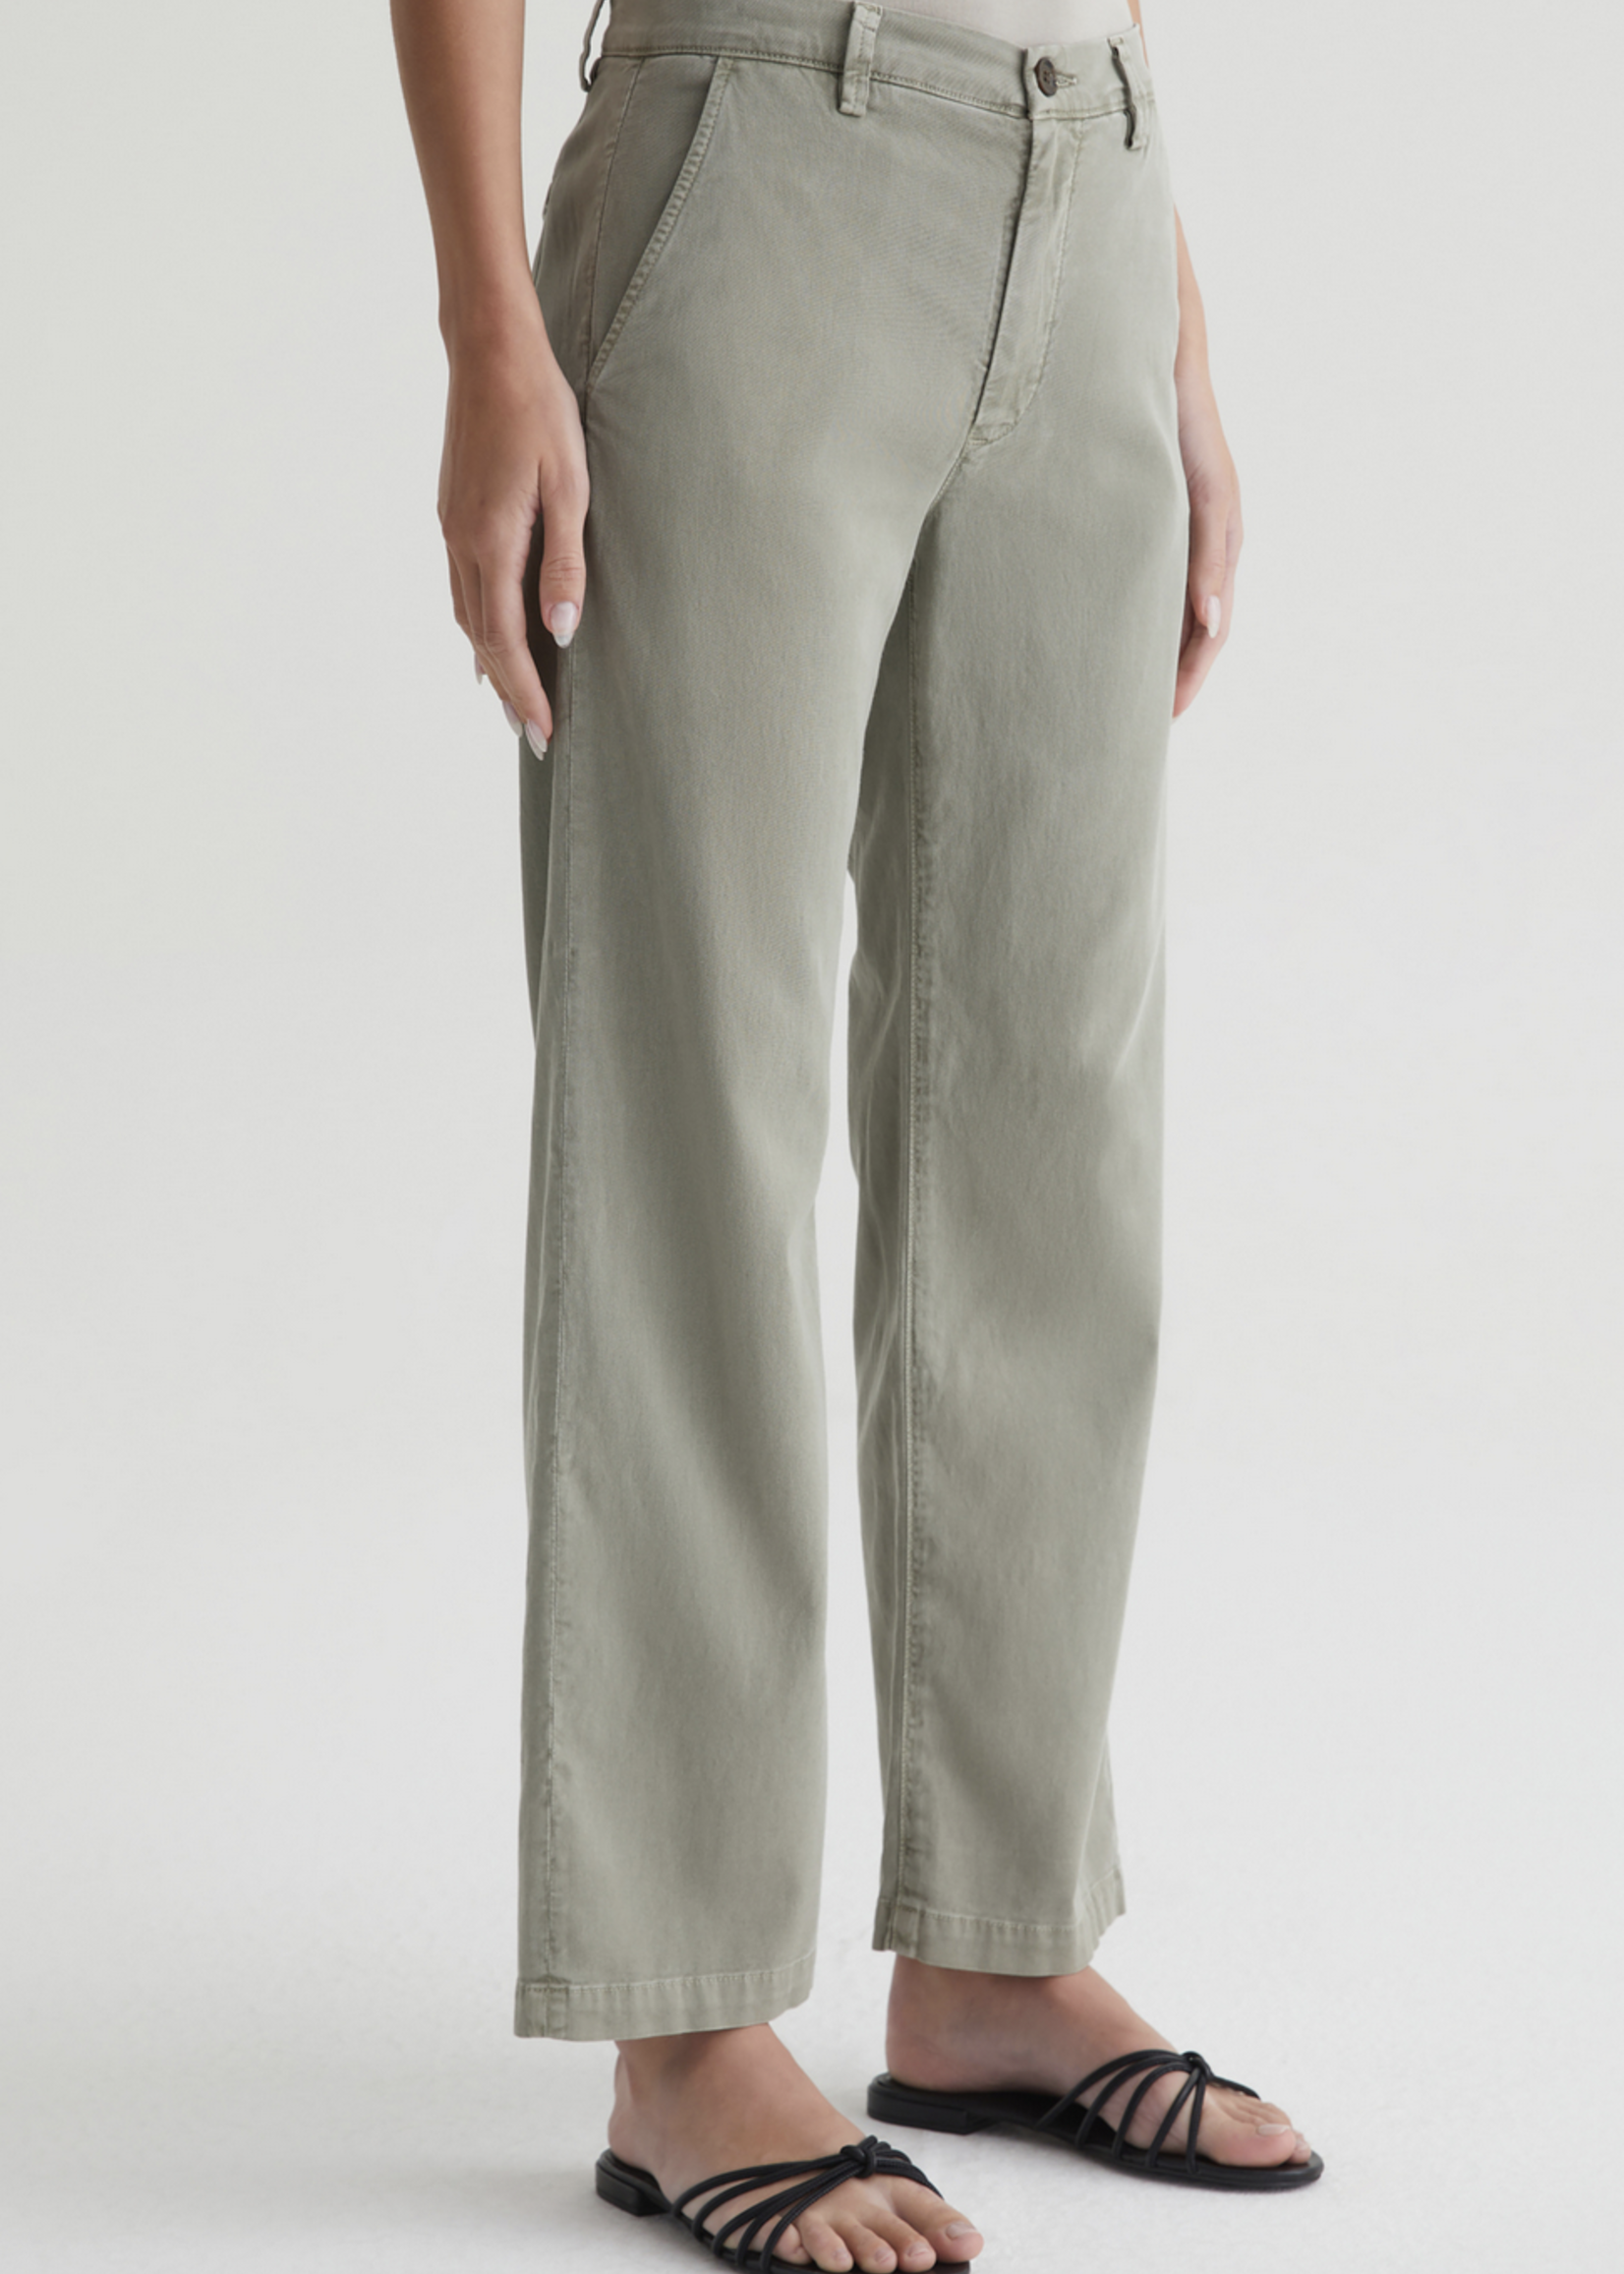 AG JEANS CADEN RELAXED STRAIGHT CHINO